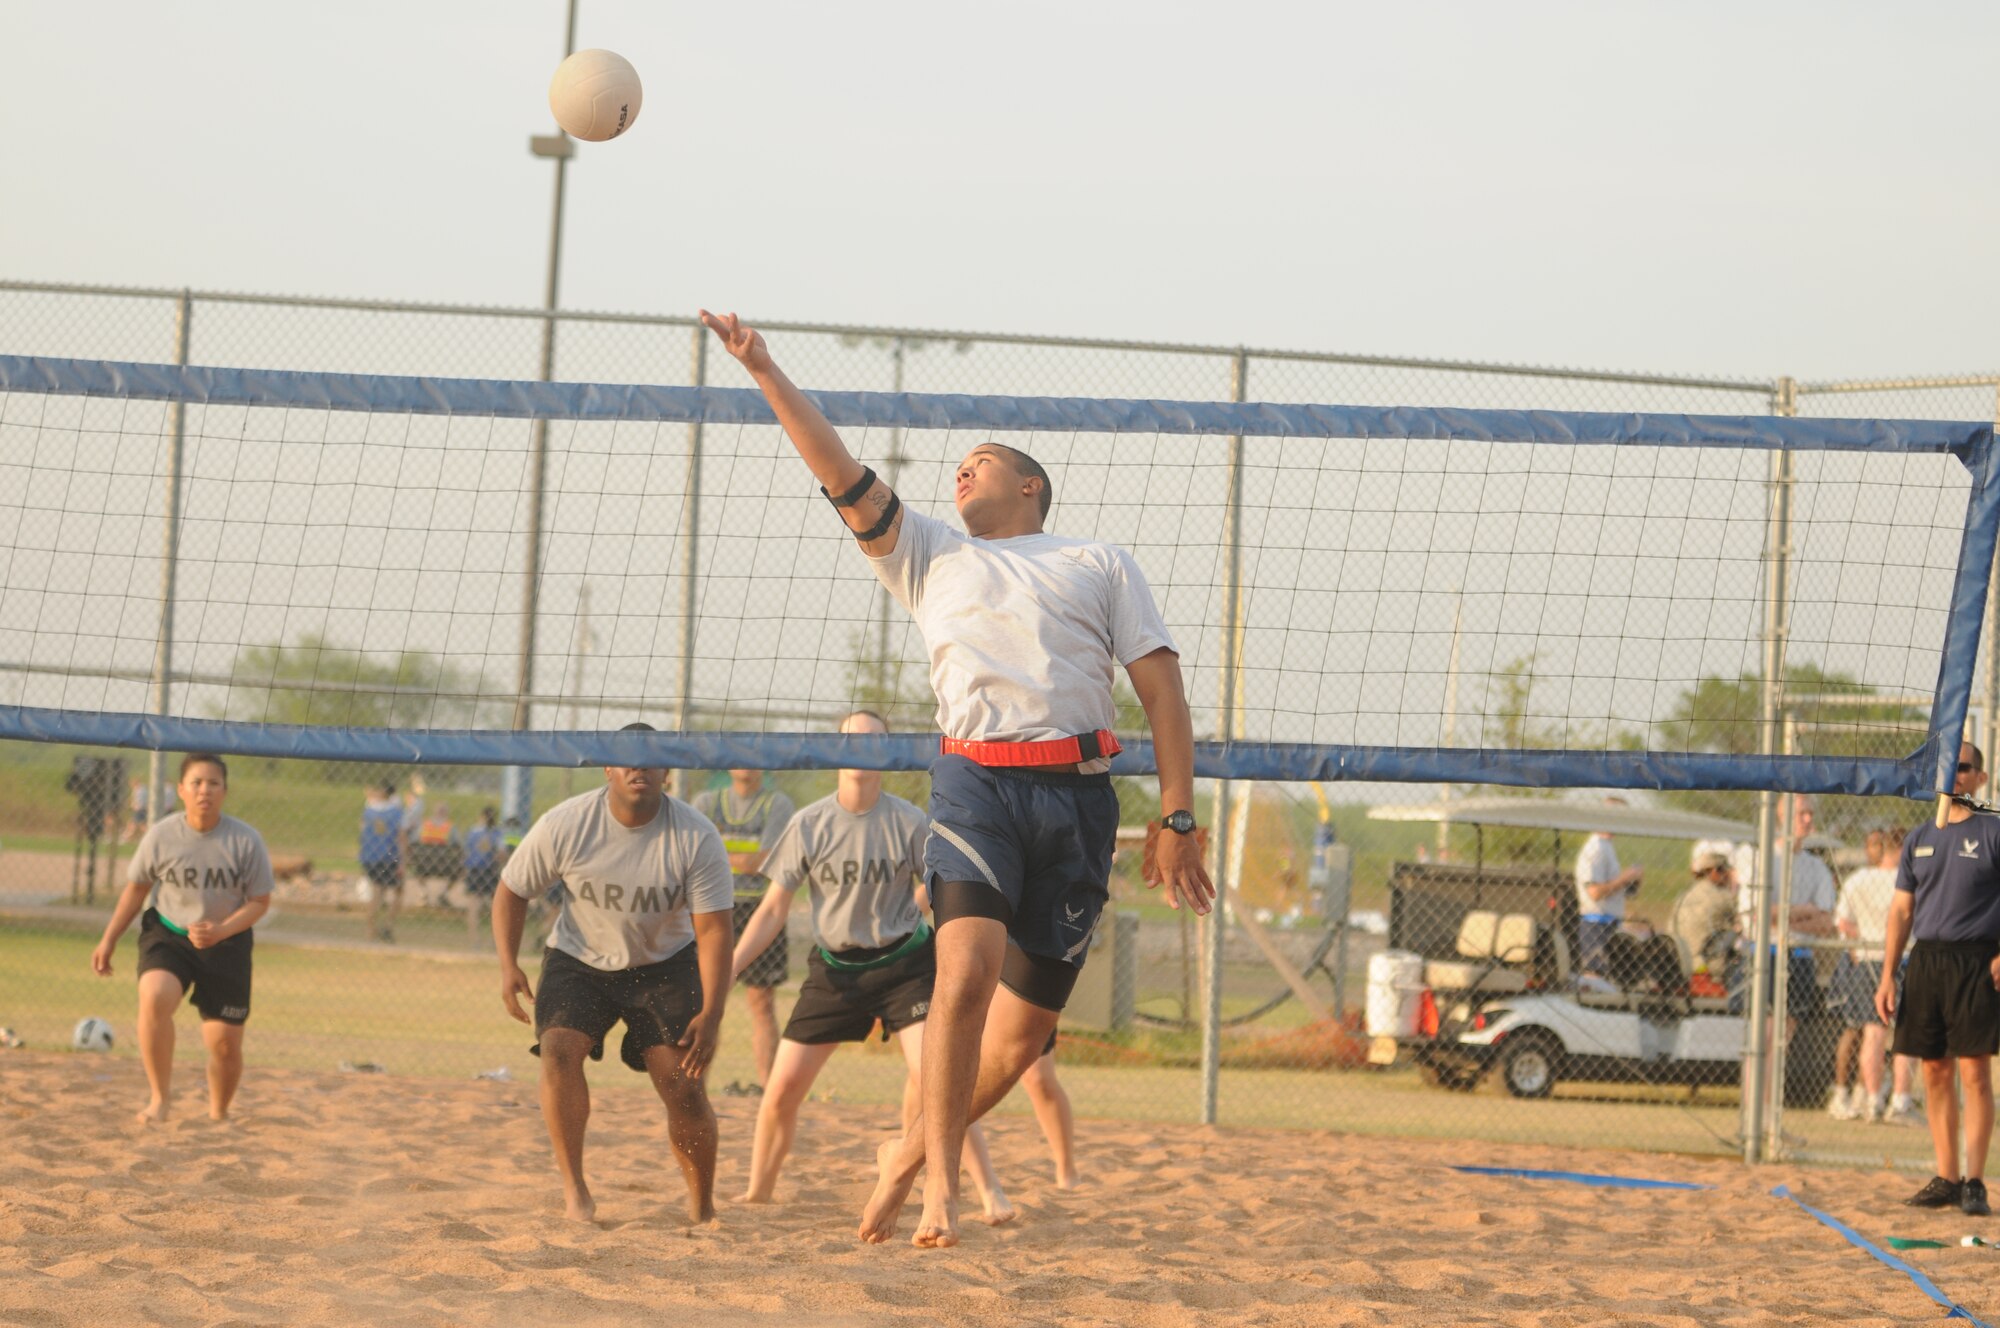 GOODFELLOW AIR FORCE BASE, Texas -- Airmen from the 312th Training Squadron participate in a volley ball game against Soldiers from the 344 Military Intelligence Battalion May 27. Team Goodfellow devoted the day to safety and sports to kick off the 101 critical days of summer. (U.S. Air Force photo/Staff Sgt. Heather L Rodgers)